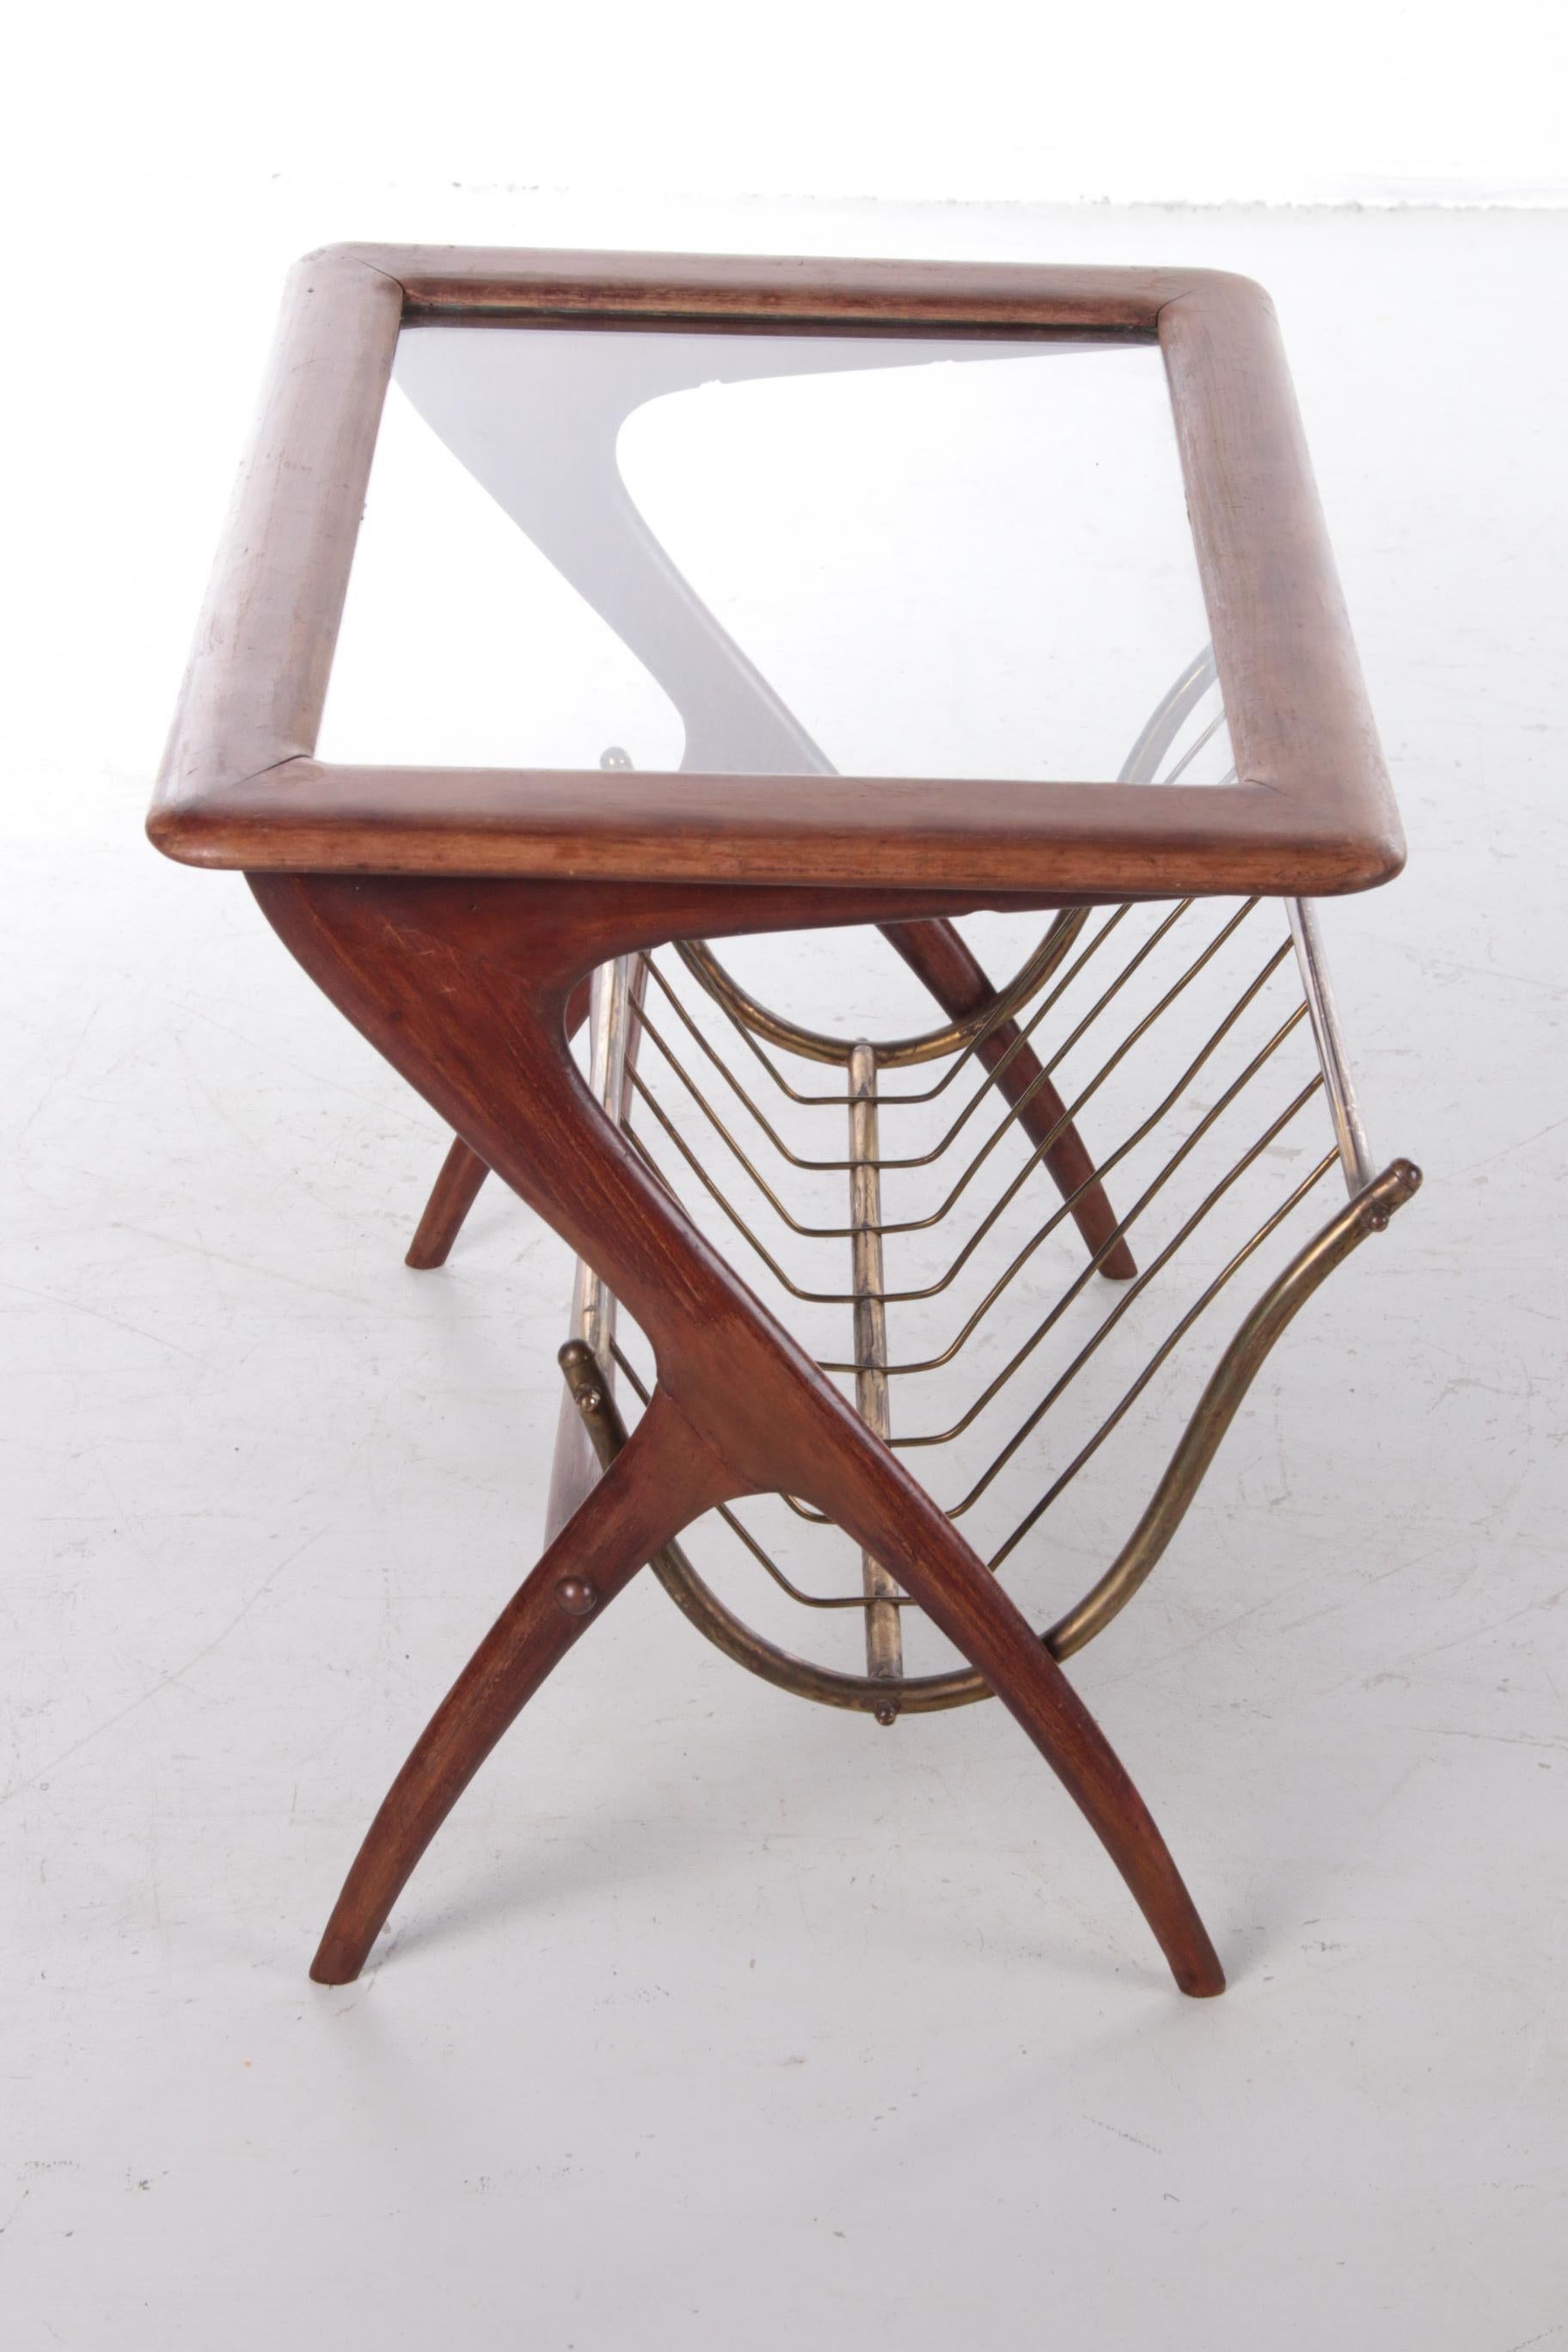 Vintage Italian Side Table with Magazine Rack by Ico Parisi, 1960s For Sale 1